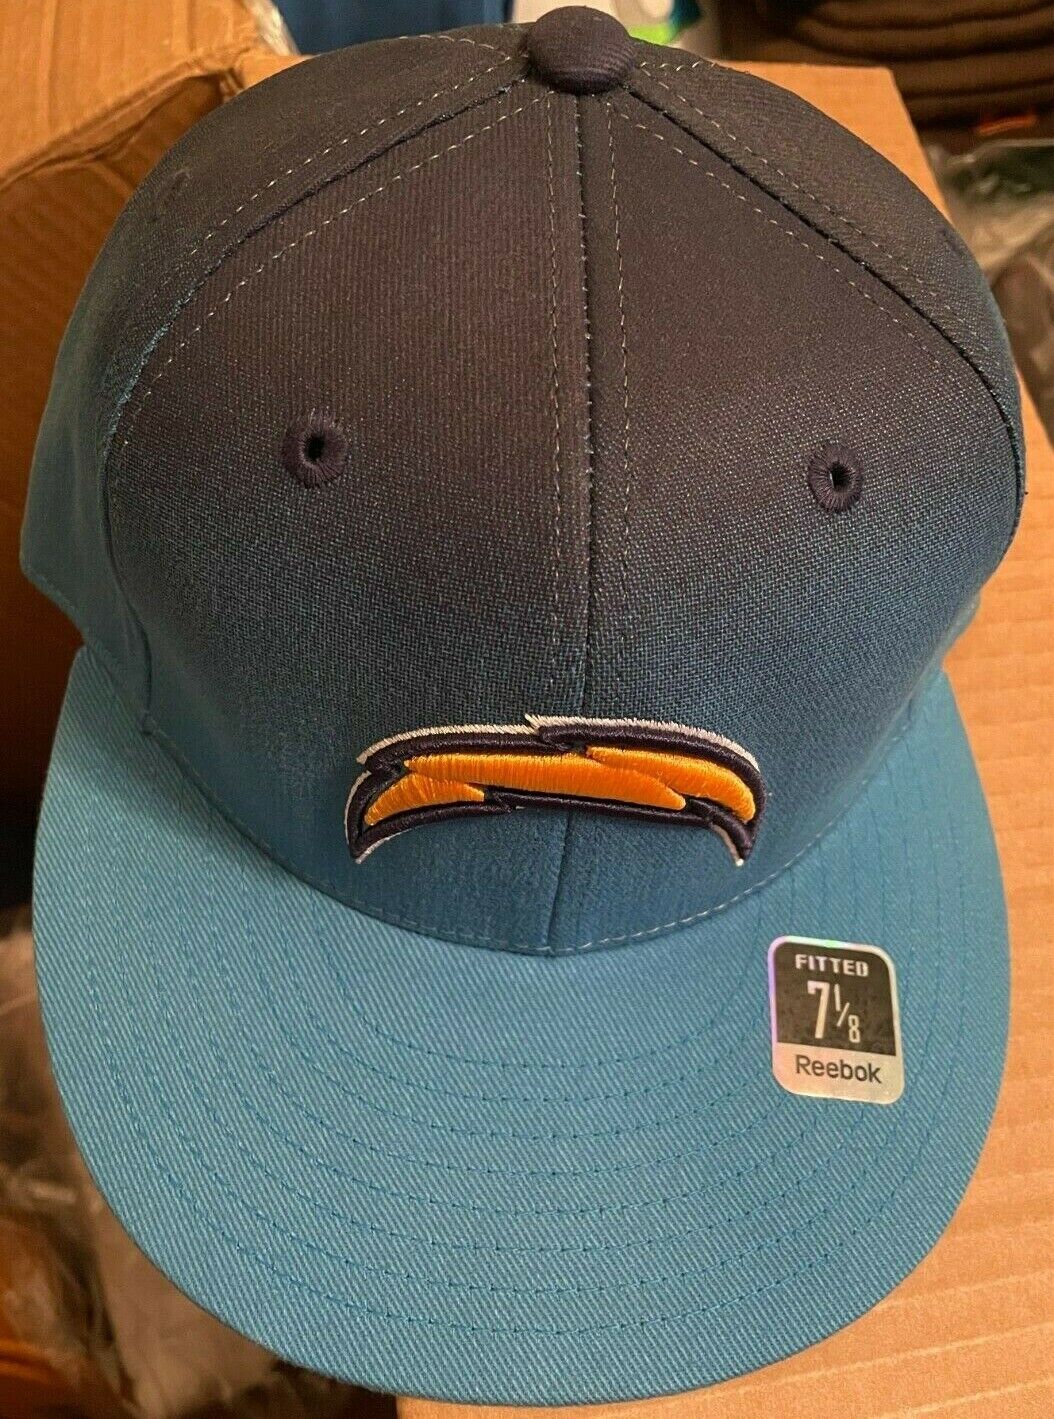 Los Angeles Chargers Two-Tone Multi-Color Reebok Fitted Cap/Hat - Size